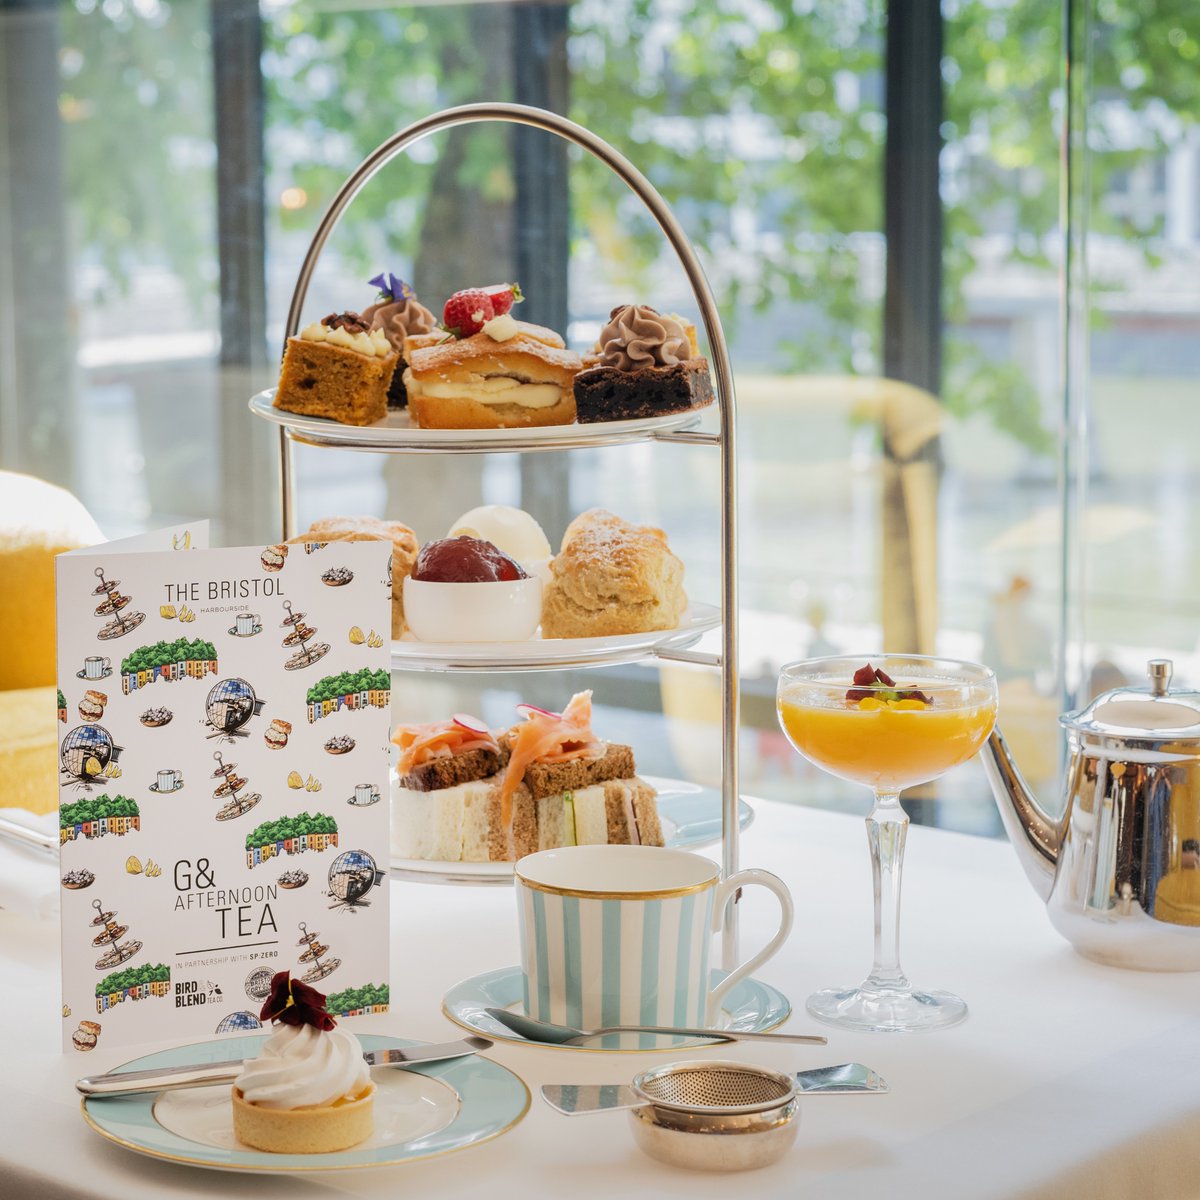 Four reasons to book an Afternoon Tea, wherever you are in the UK: The Marylebone, The Kensington, The Bloomsbury, and The Bristol. Which will you enjoy first?